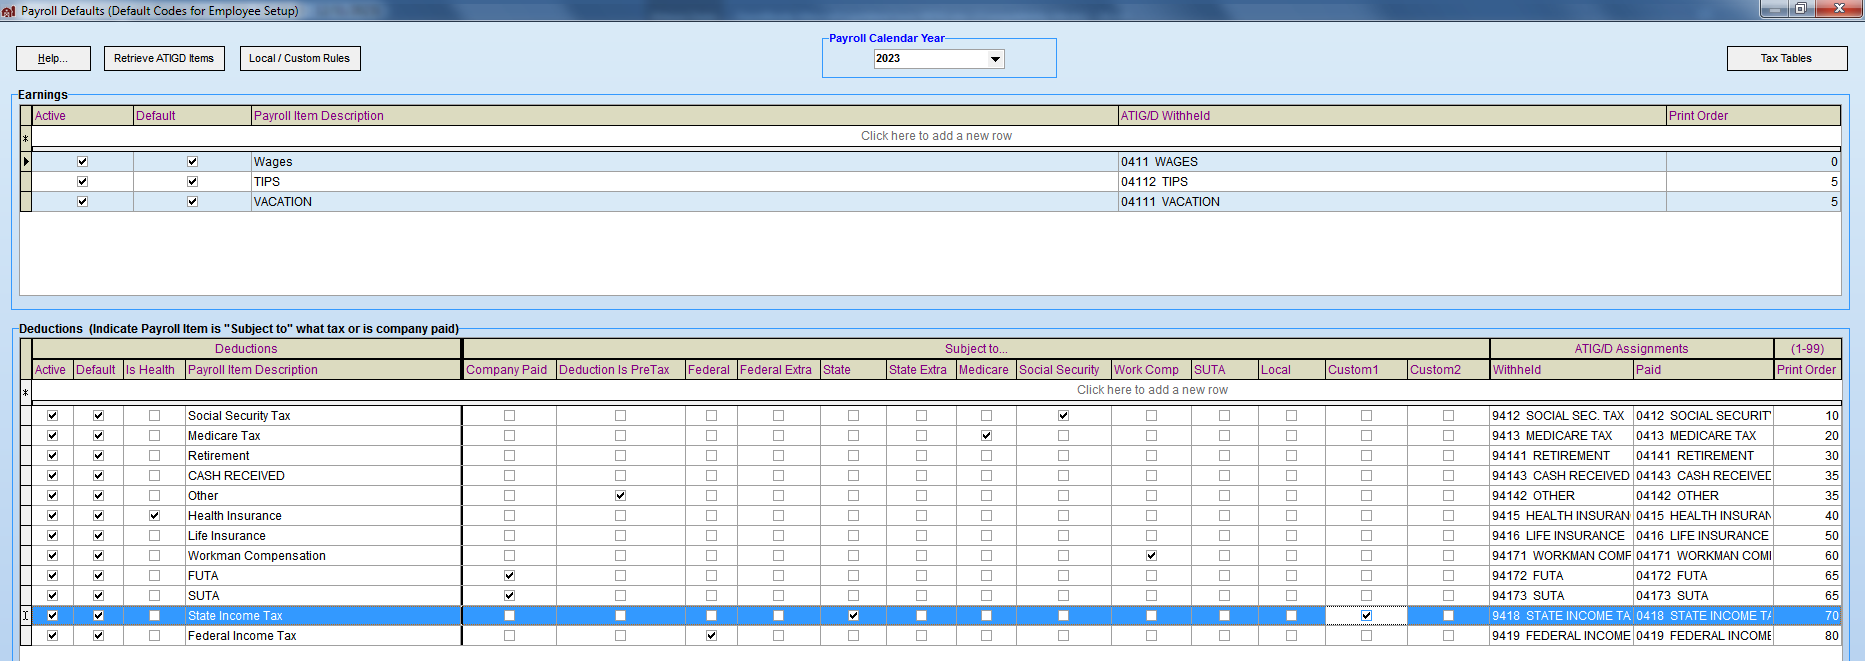 FarmBooks payroll defaults screen showing detailed list of earnings and deductions with a state income tax deduction highlighted